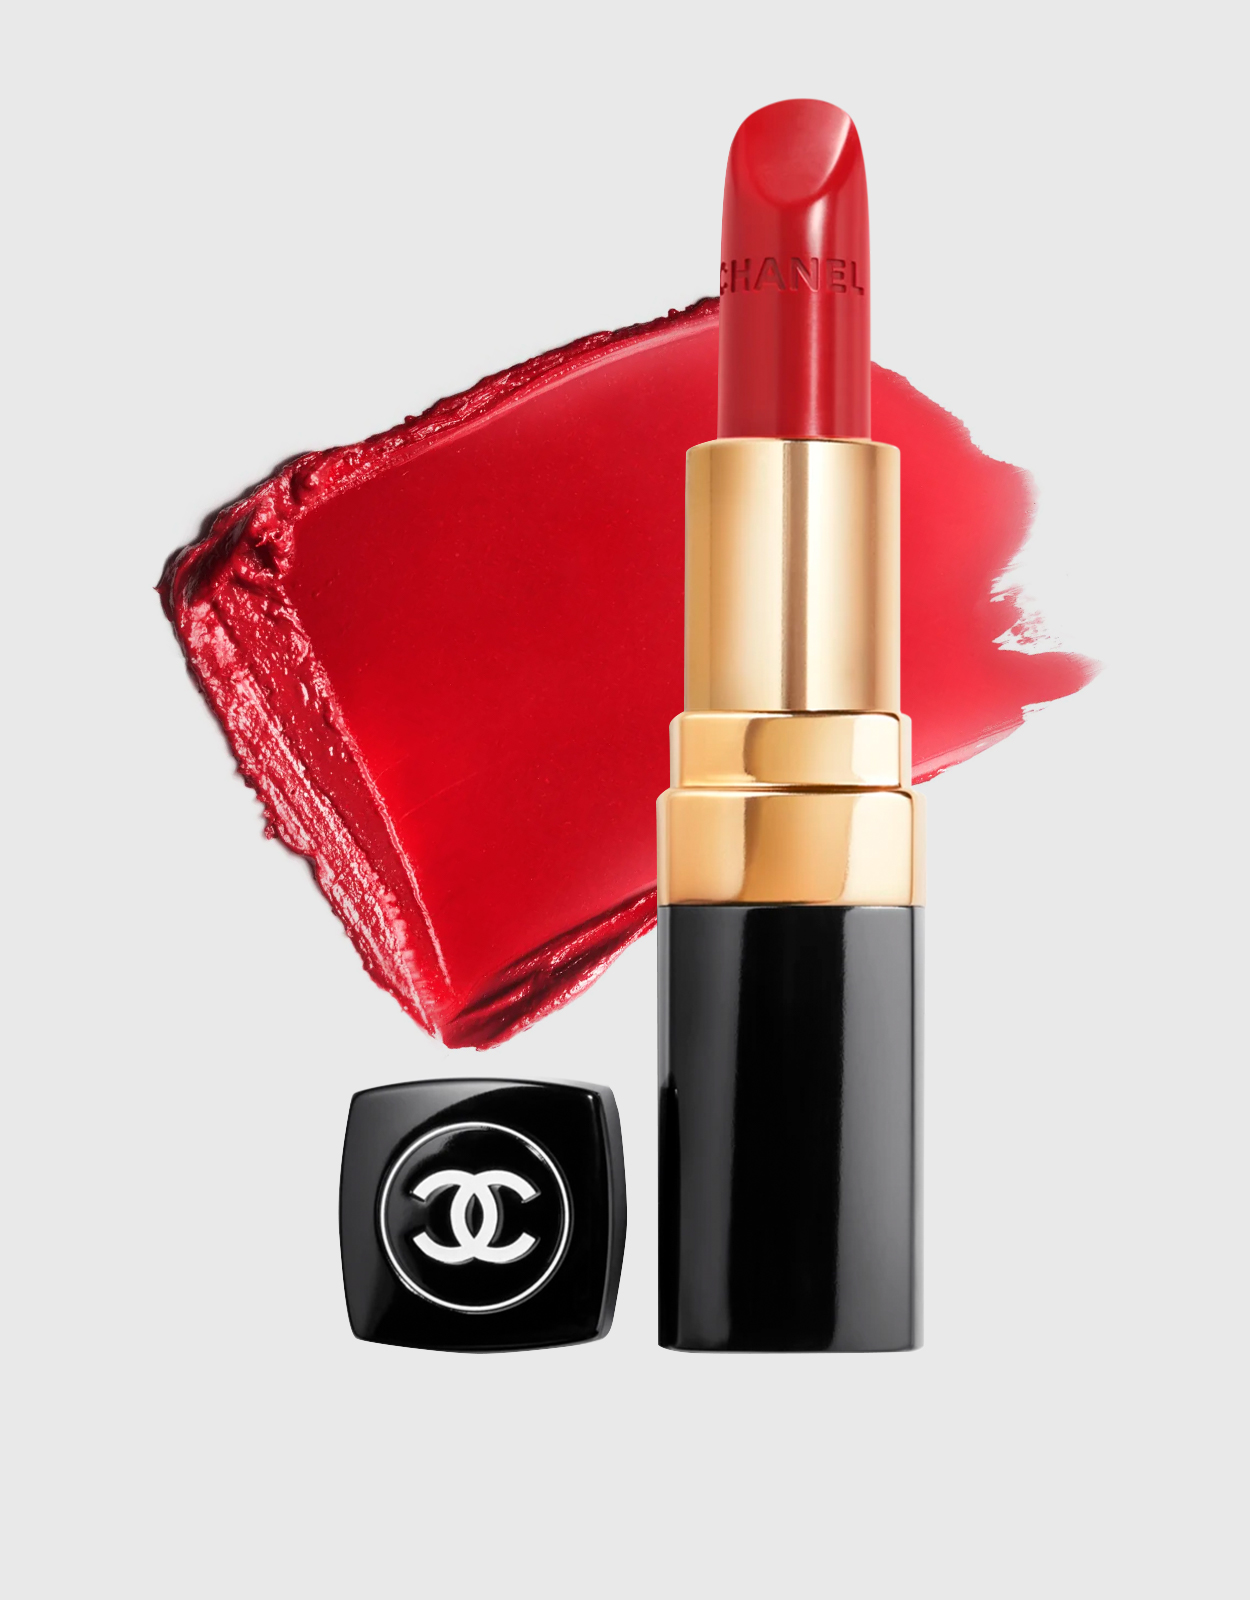 LIPSTICK CHANEL ROUGE 4 IN 1